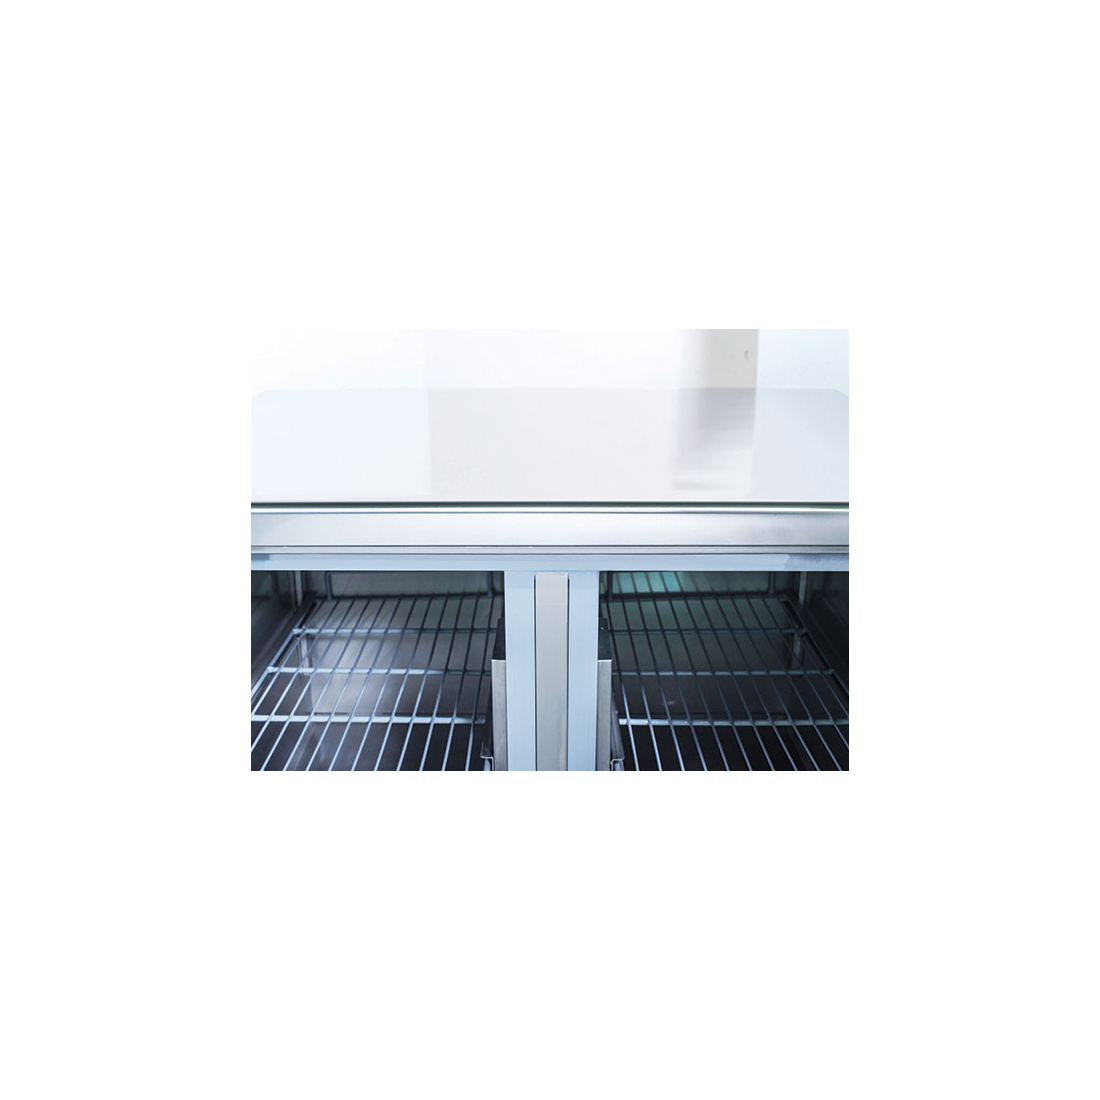 COOL HEAD ,CRP90, Pizza & Sandwiches Preparation Chiller With Two Doors And Granite Worktop - Depth 70 cm|mkayn|مكاين